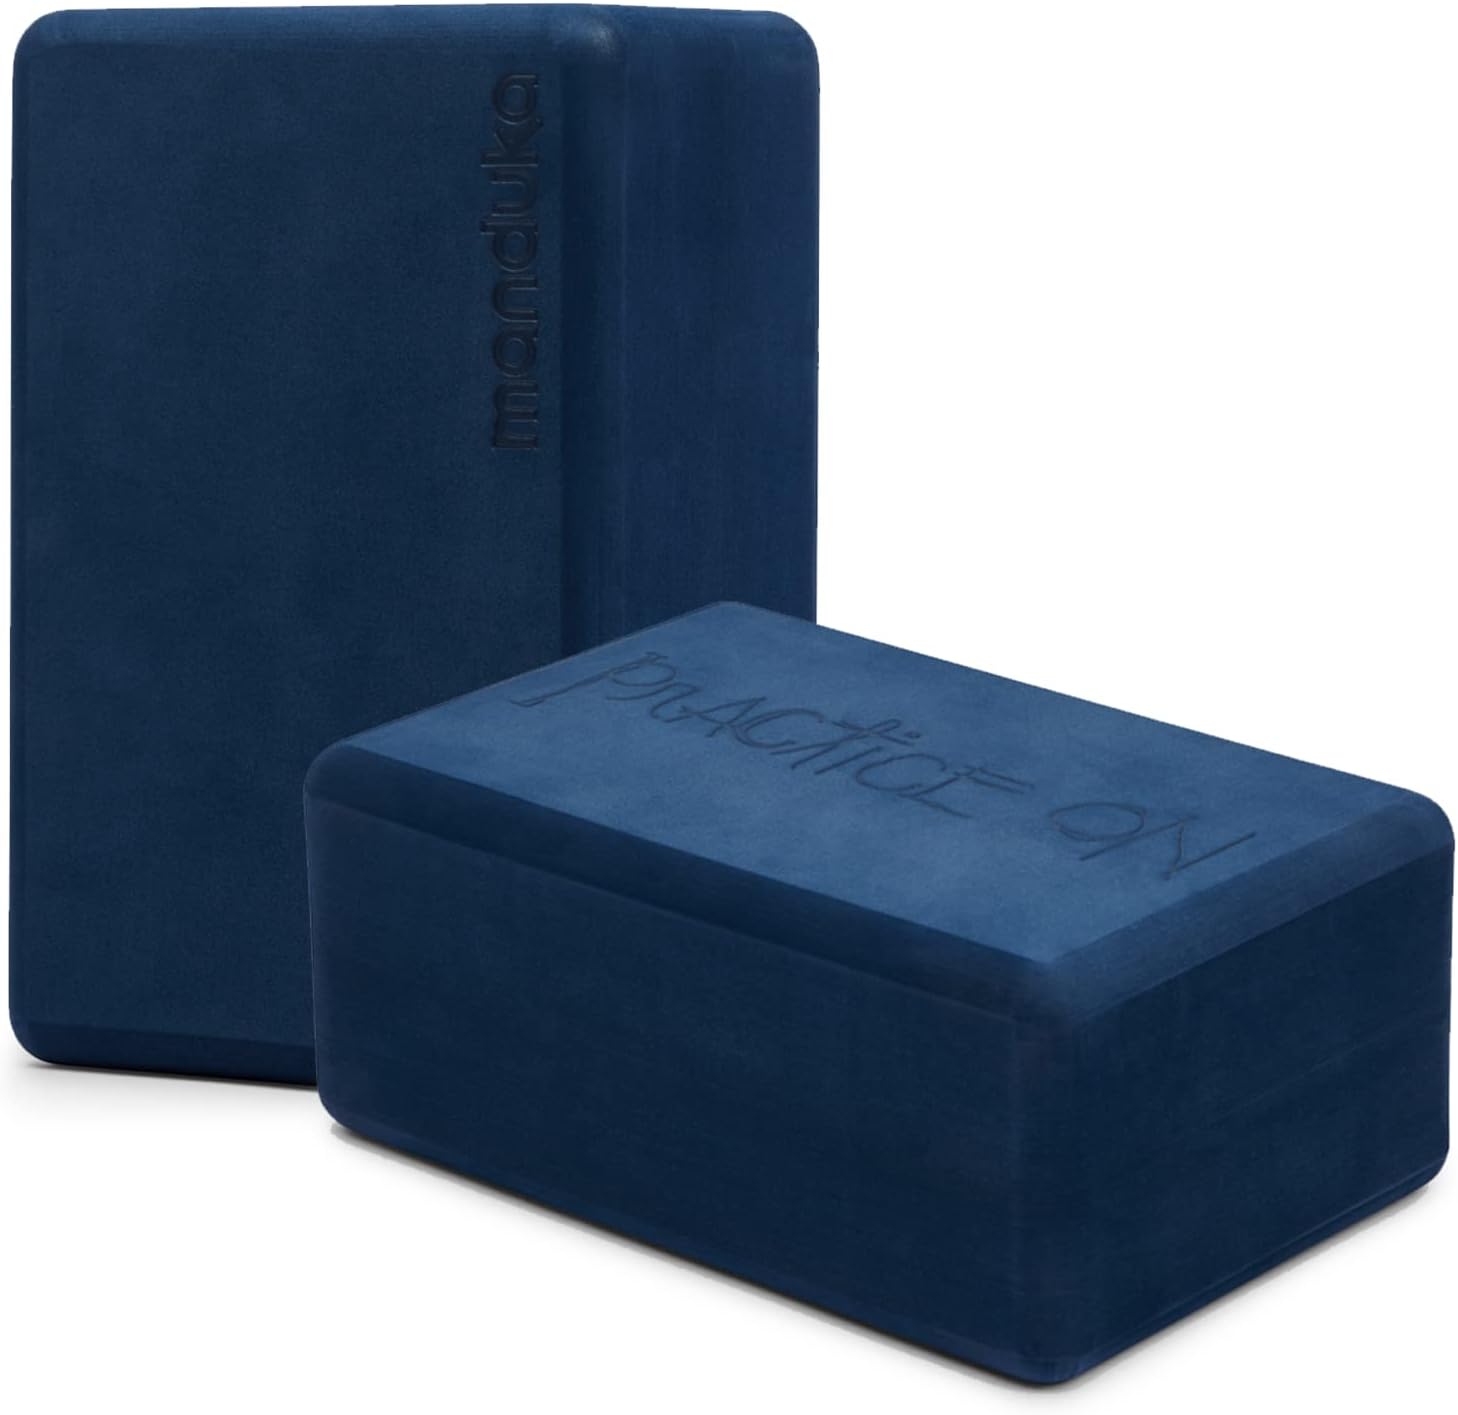 Manduka Foam Block Review: Enhance Your Yoga Practice with Style and Sustainability